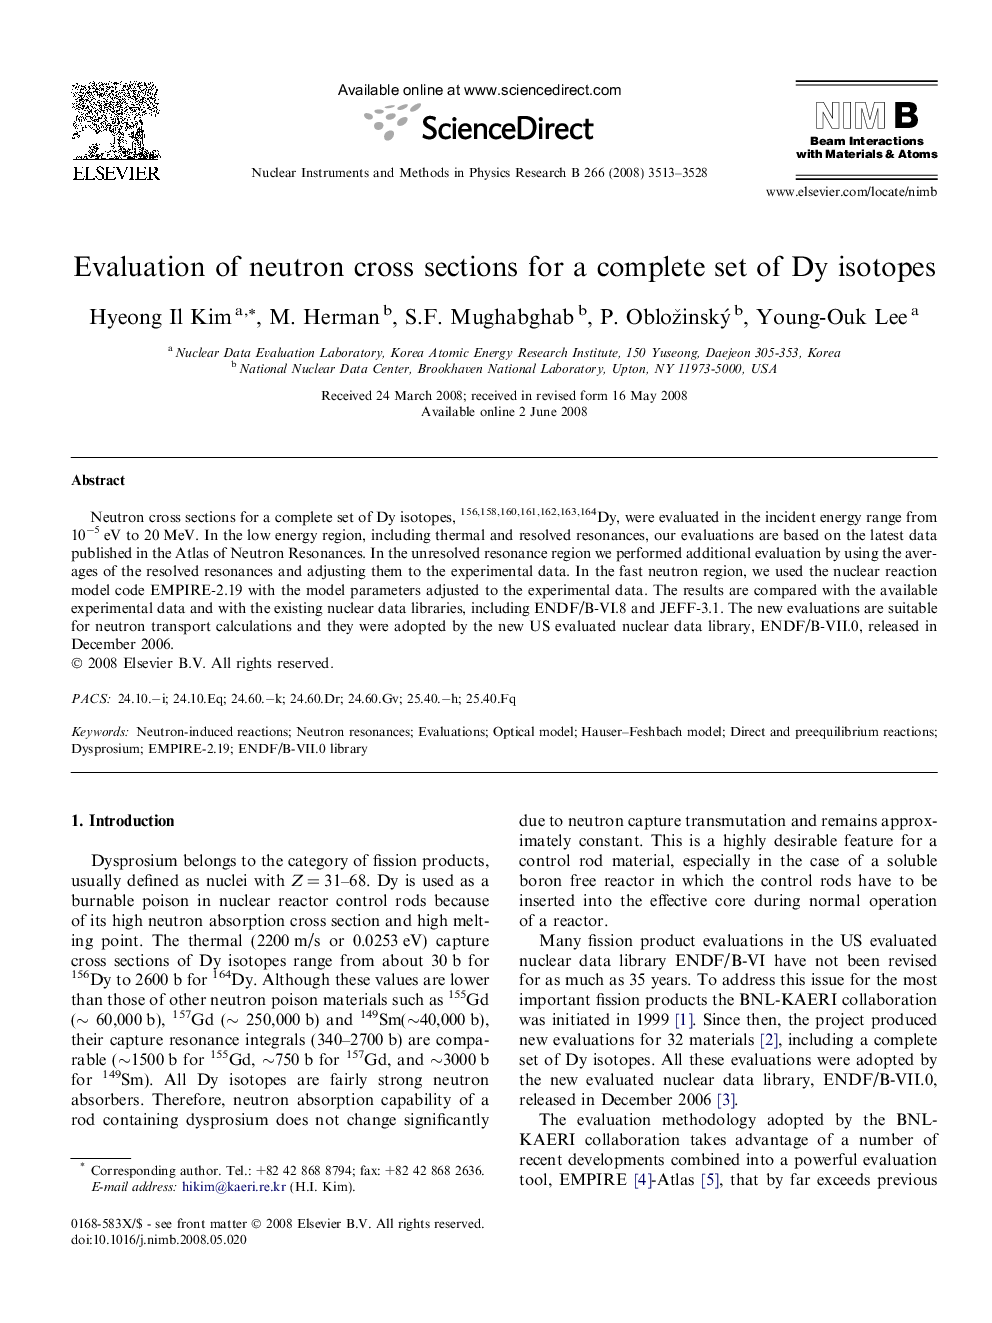 Evaluation of neutron cross sections for a complete set of Dy isotopes